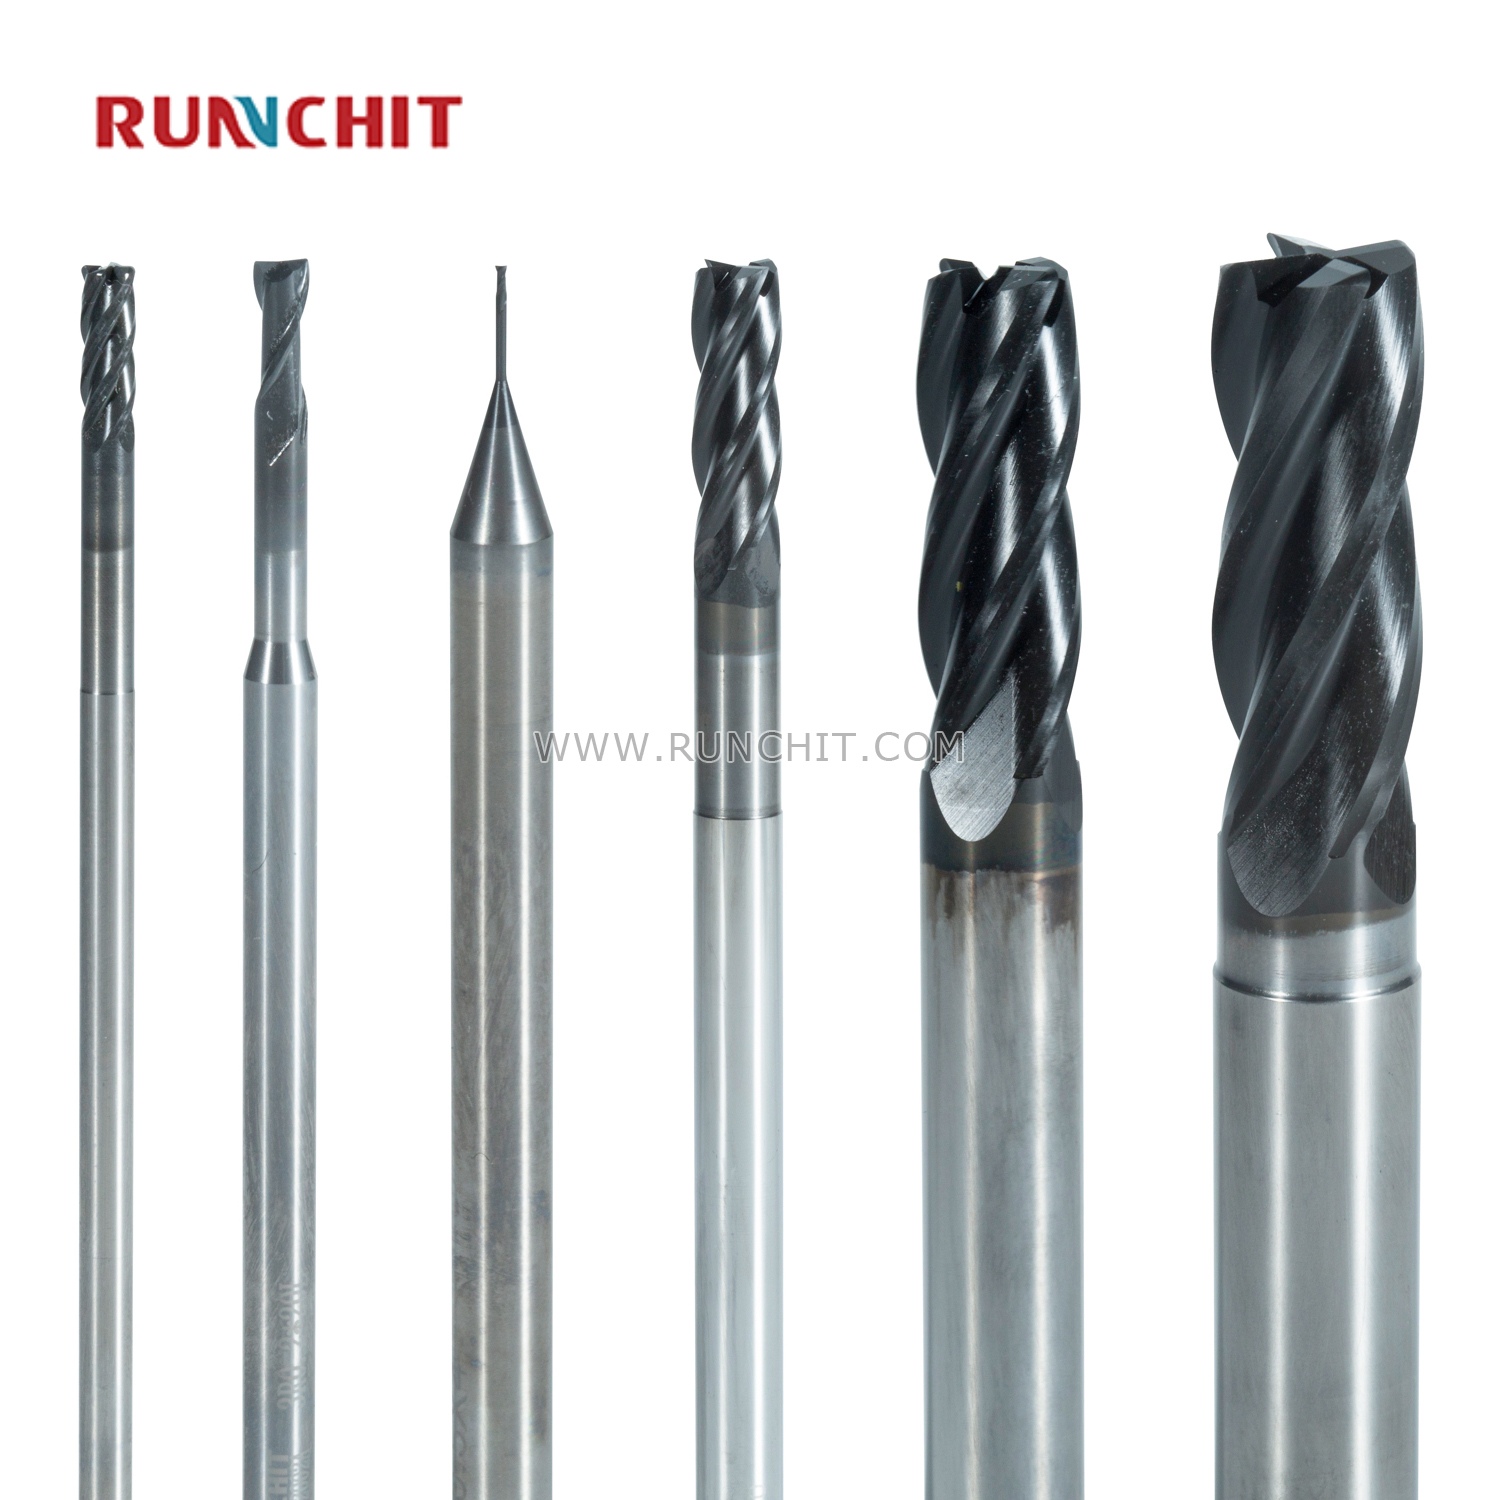 Graphite end mill for metal processing manufacturers teach you how to choose and use end mills correctly